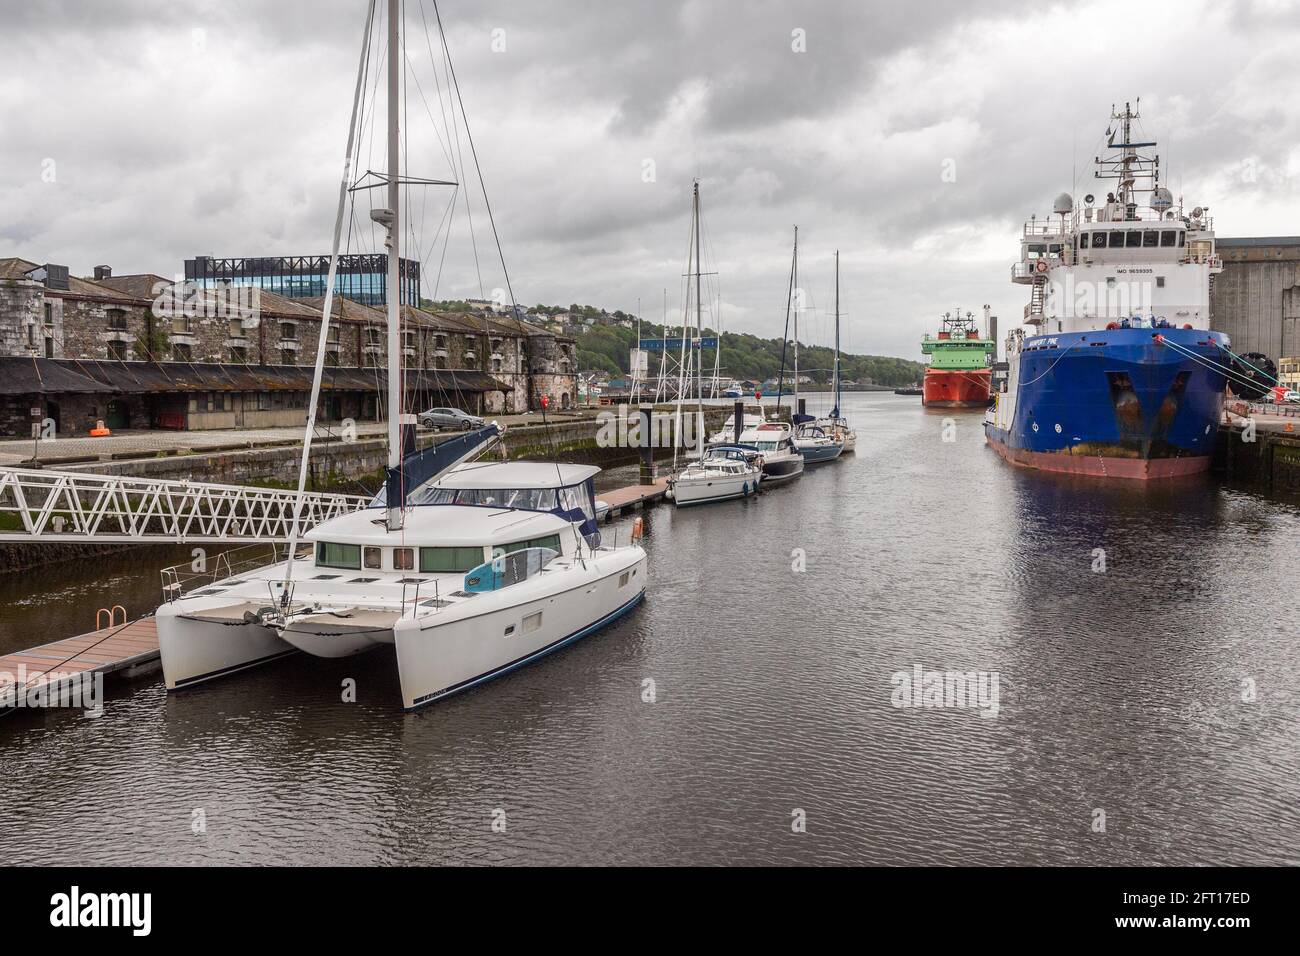 Cork, Ireland. 21st May, 2021. The Port of Cork was busy this morning with pleasure yachts and motor boats moored in the marina, as well as fishing boats and merchant vessels. Credit: AG News/Alamy Live News Stock Photo